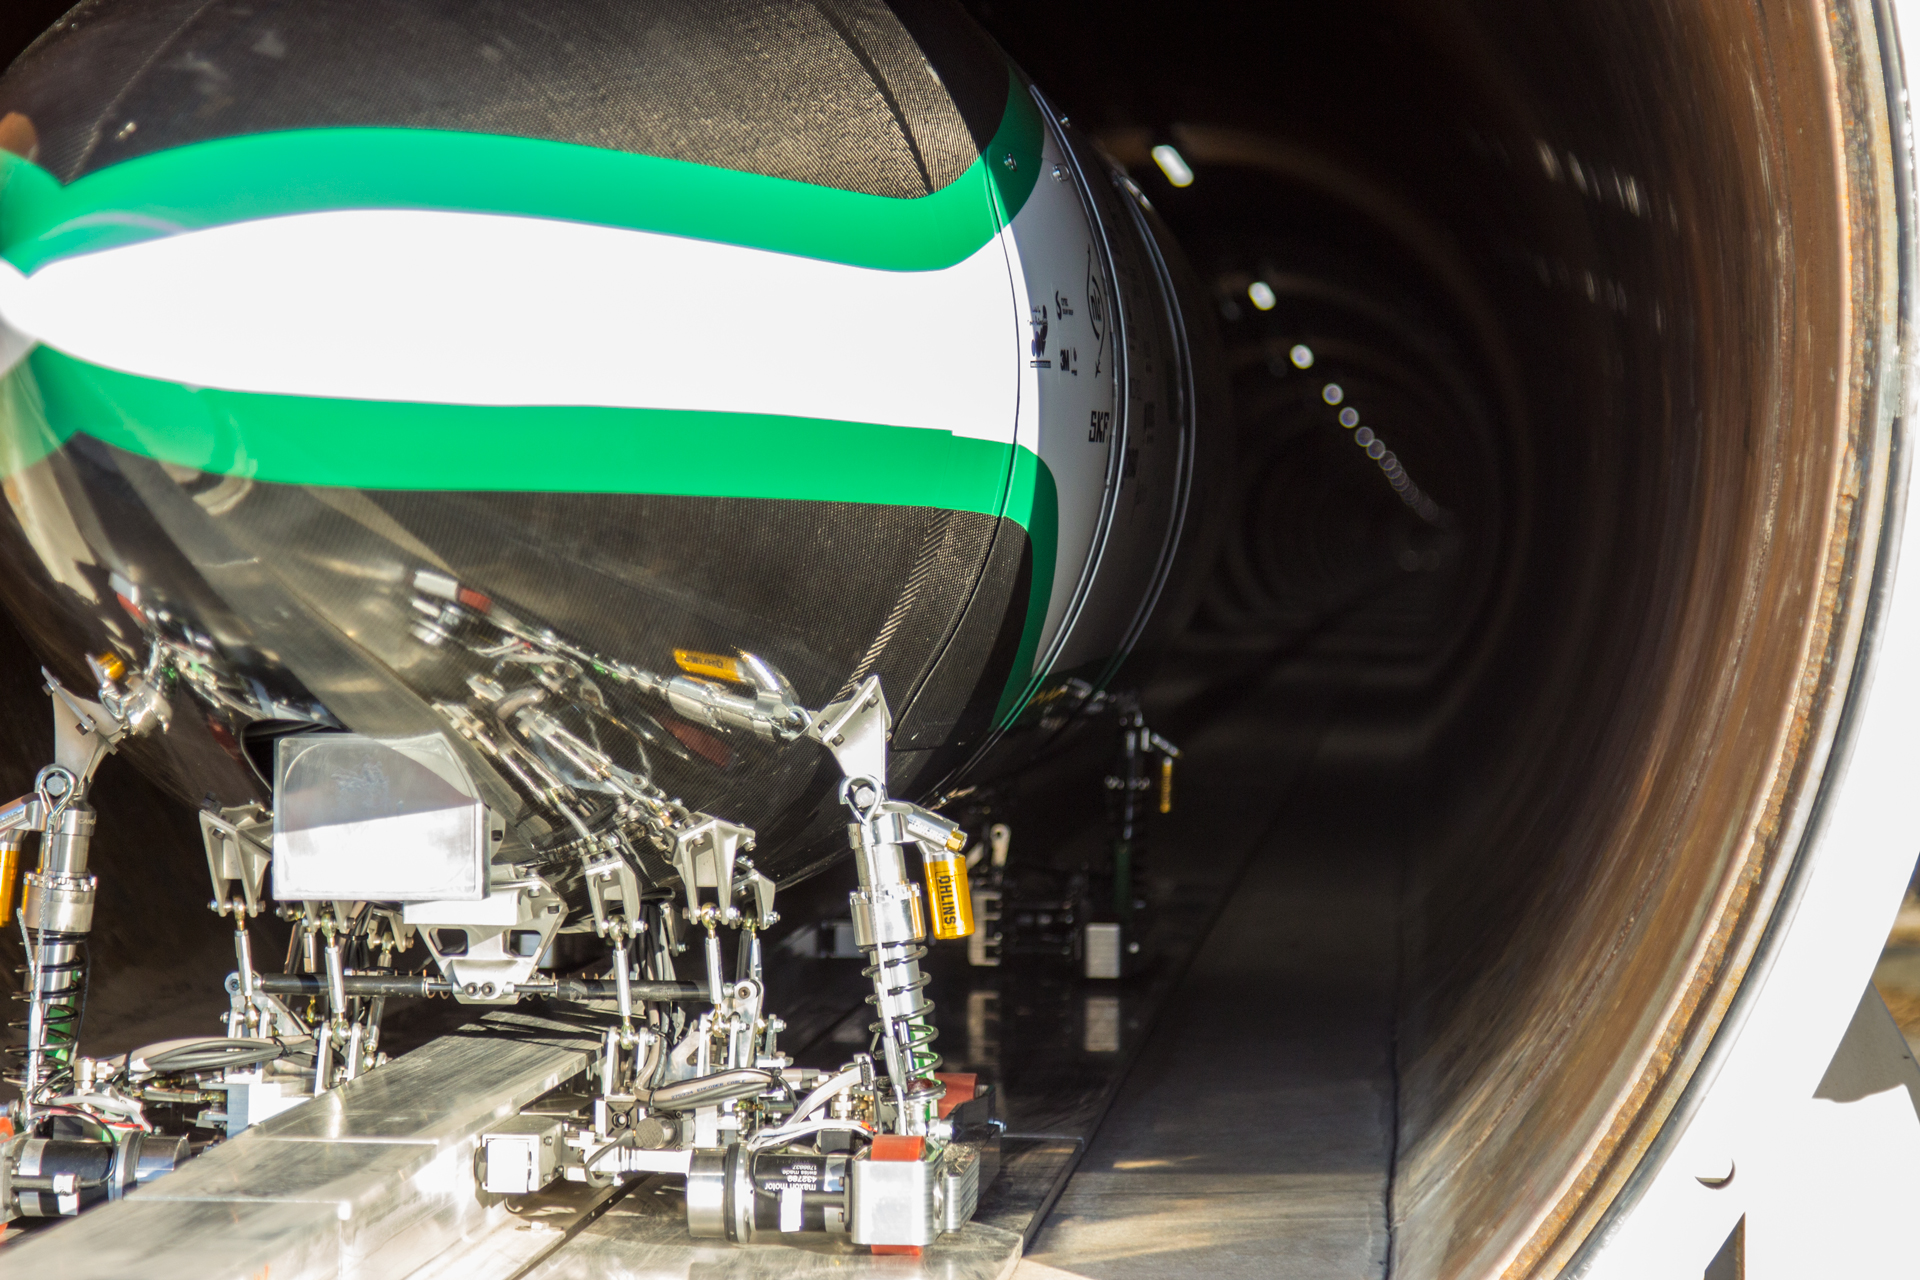 Delft Hyperloop Pod in SpaceX Hyperloop Pod Competition Test Tube